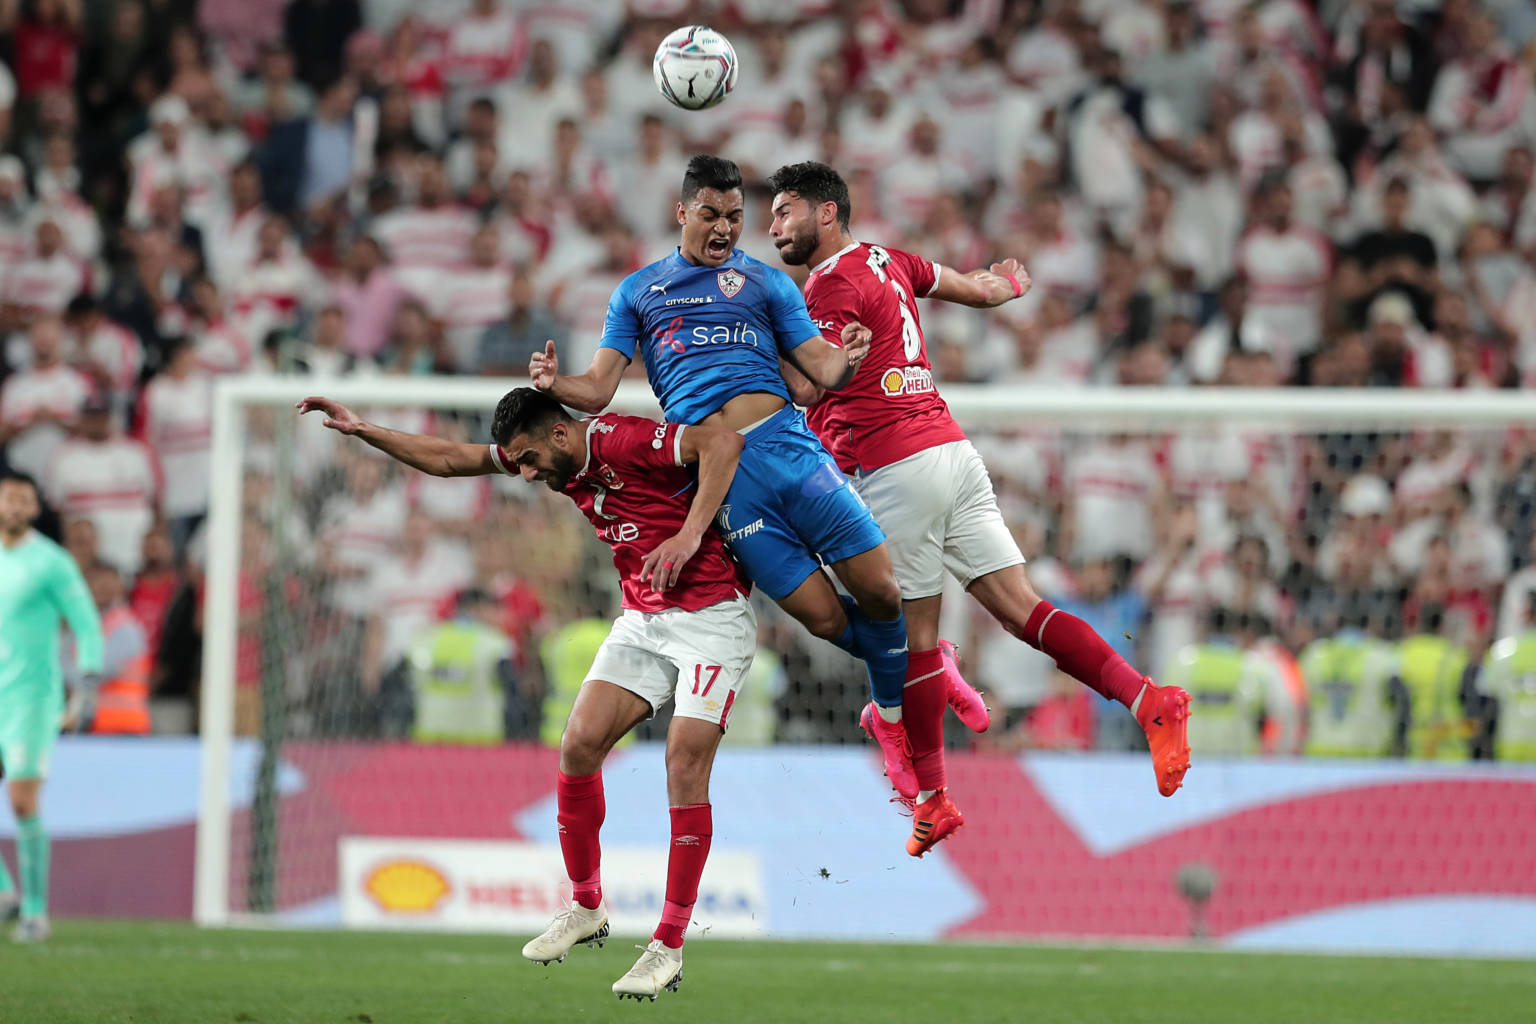 Ahly's midfielder Amr el-Solia (L) and defender Yasser Ibrahim (R) vie for a header against Zamalek's forward Mostafa Mohamed (C) during the Egyptian Super Cup final football match between Ahly SC and Zamalek SC at Mohammed Bin Zayed stadium in Abu Dhabi on February 20, 2020. (Photo by Mahmoud KHALED / AFP) (Photo by MAHMOUD KHALED/AFP via Getty Images)